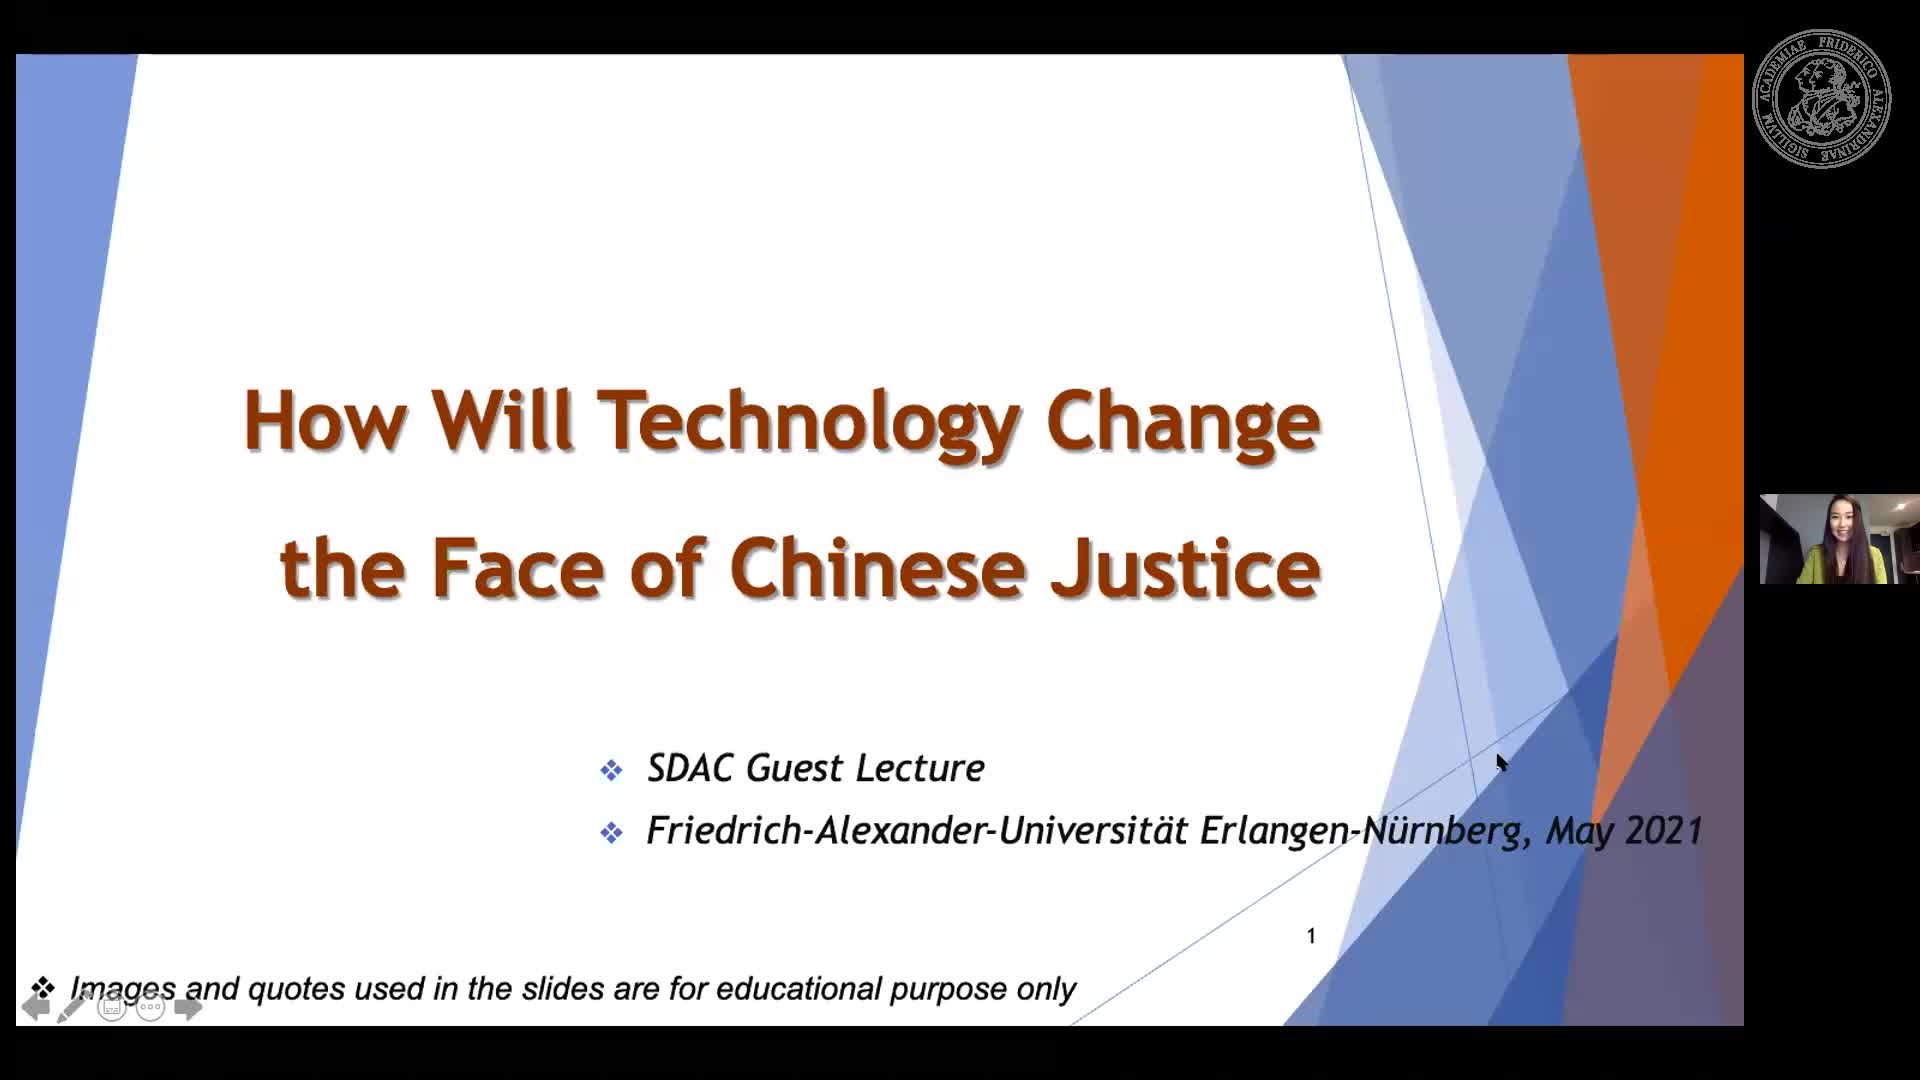 Zhiyu Li (Durham University): "How Will Technology Change the Face of Chinese Justice?" preview image